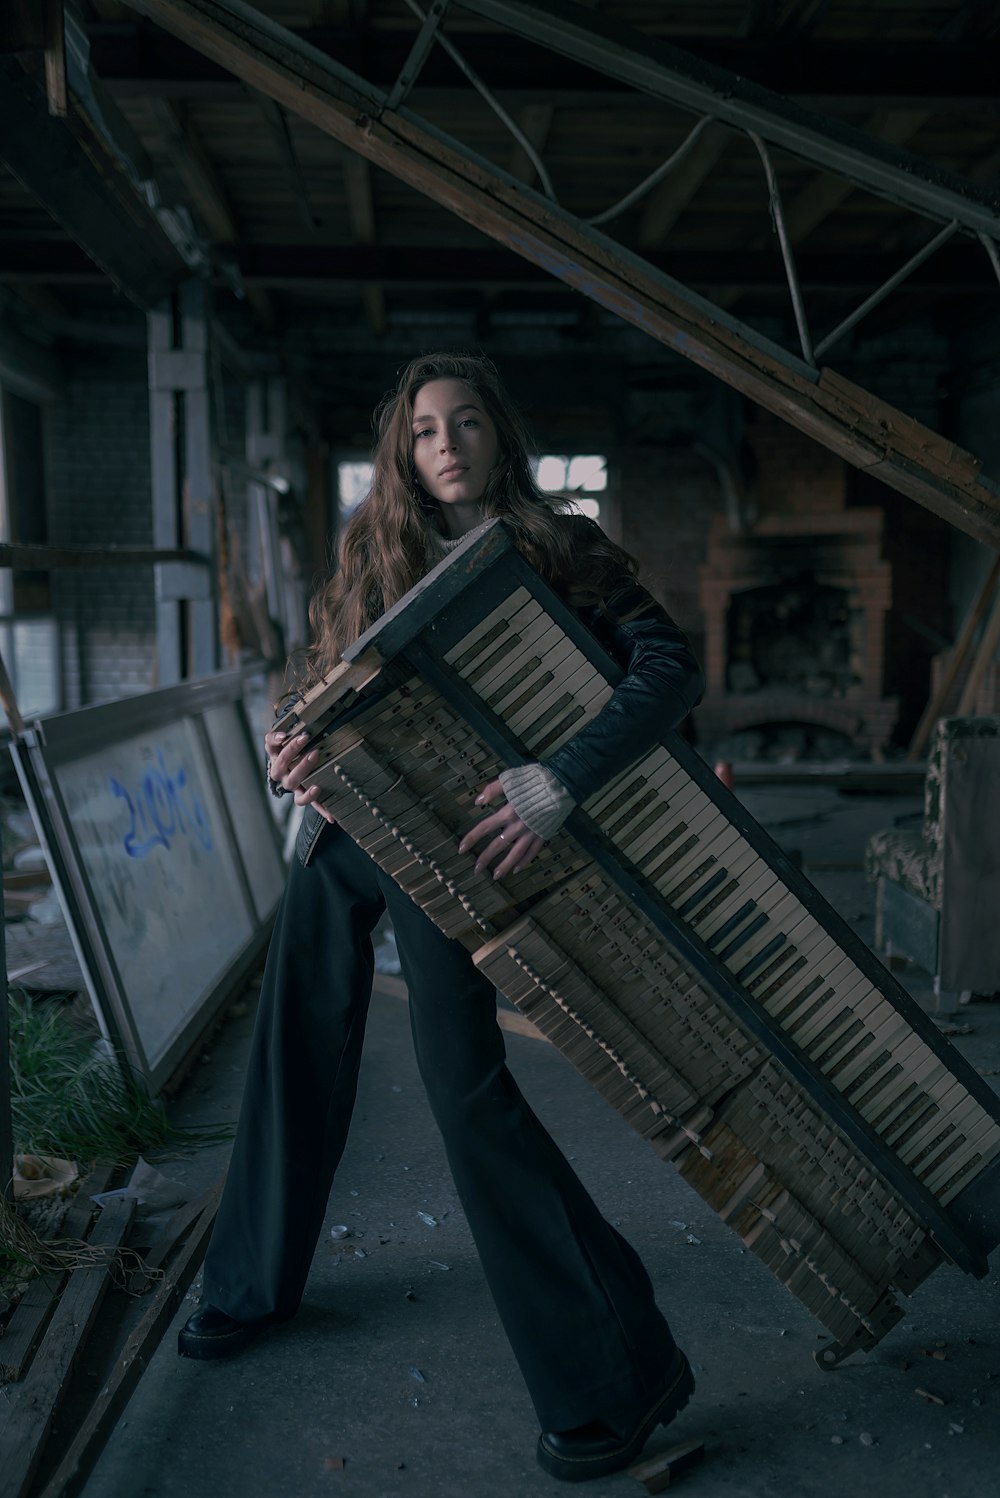 a woman carrying a large wooden instrument in a warehouse